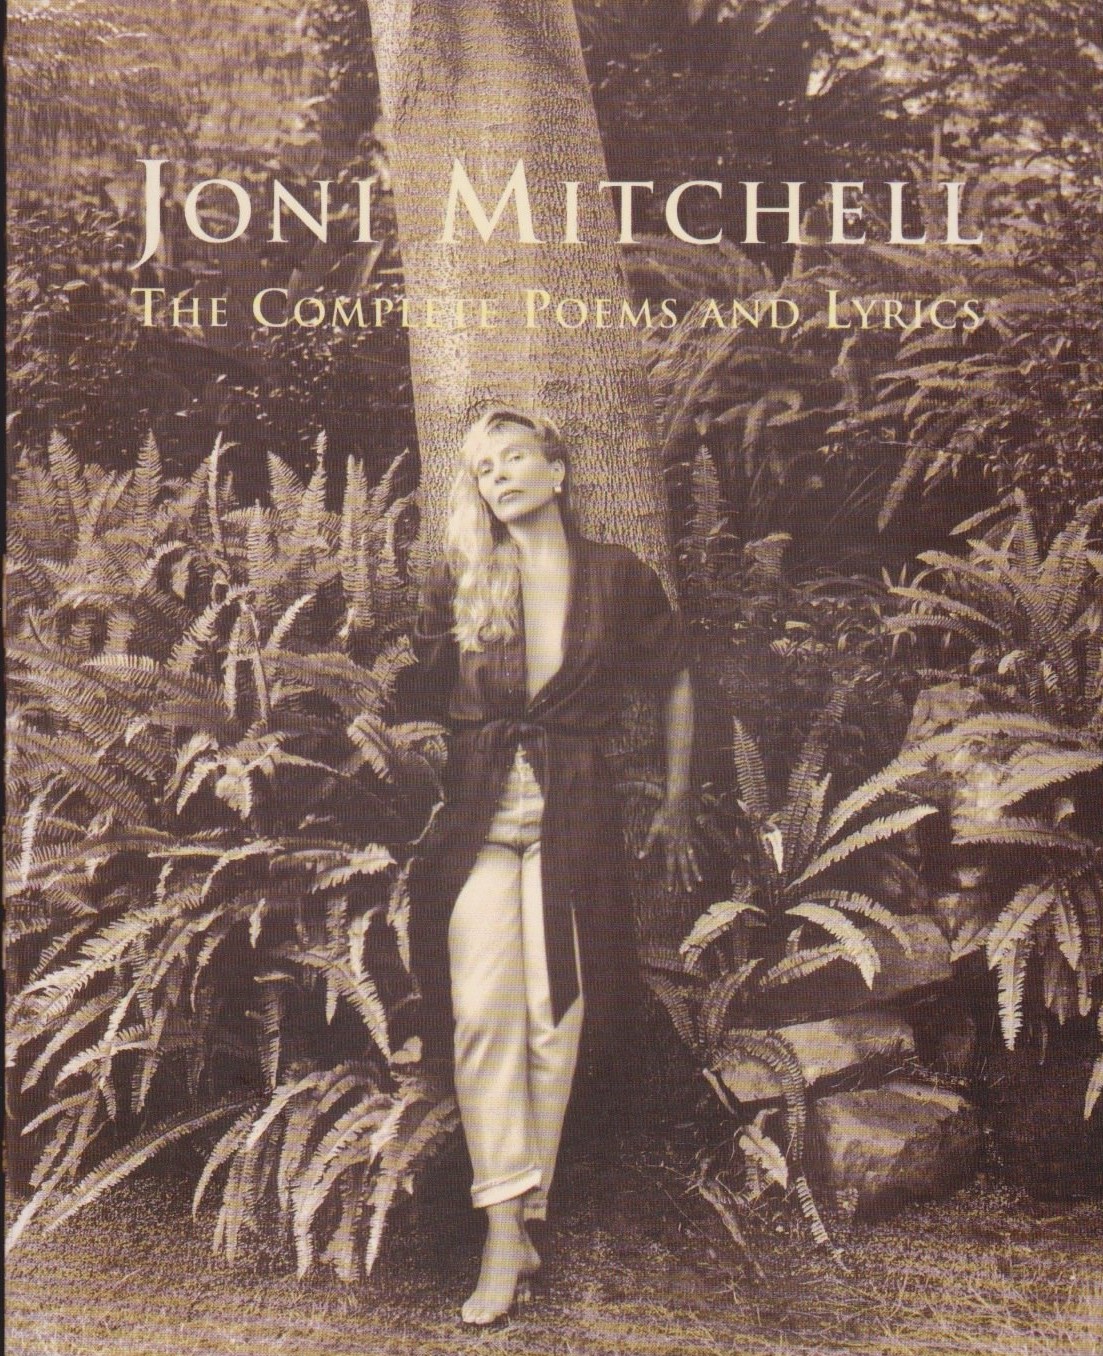 The Complete Poems And Lyrics' is completed by a Joni Mitchell Discogr...